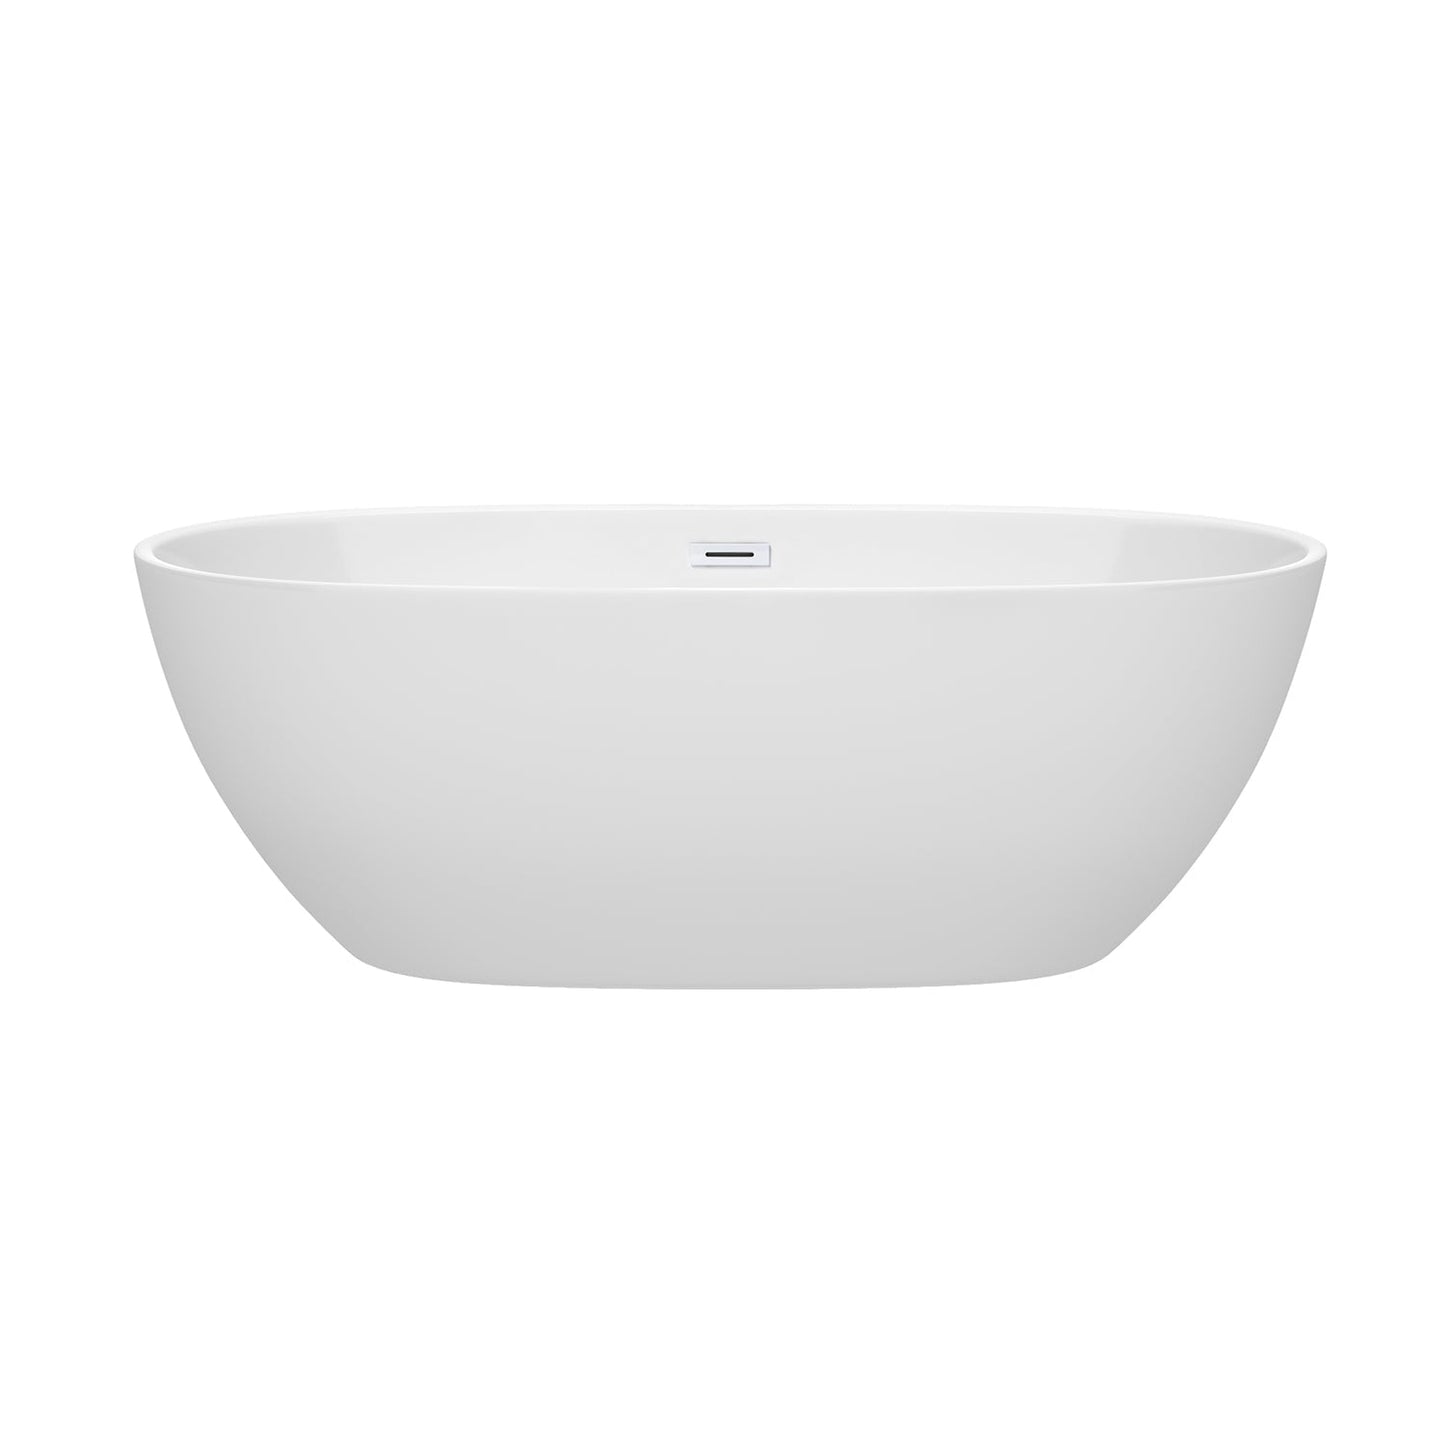 Wyndham Collection Juno 67" Freestanding Bathtub in White With Shiny White Drain and Overflow Trim